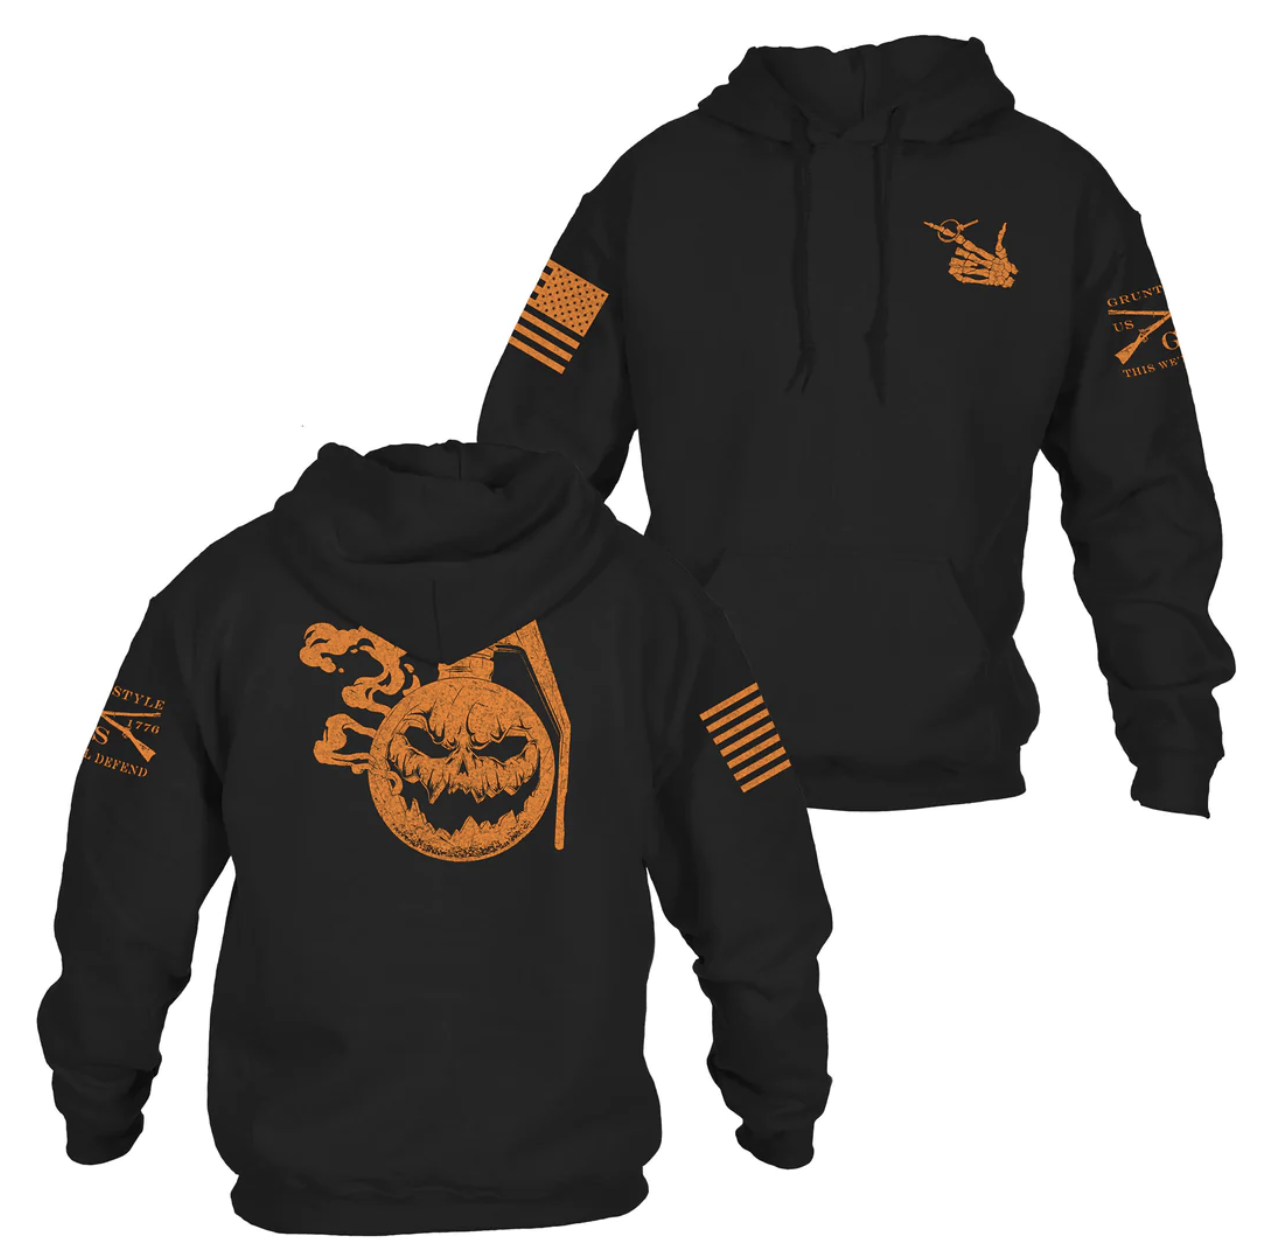 Halloween Hoodies And T-Shirts From Grunt Style - BroBible